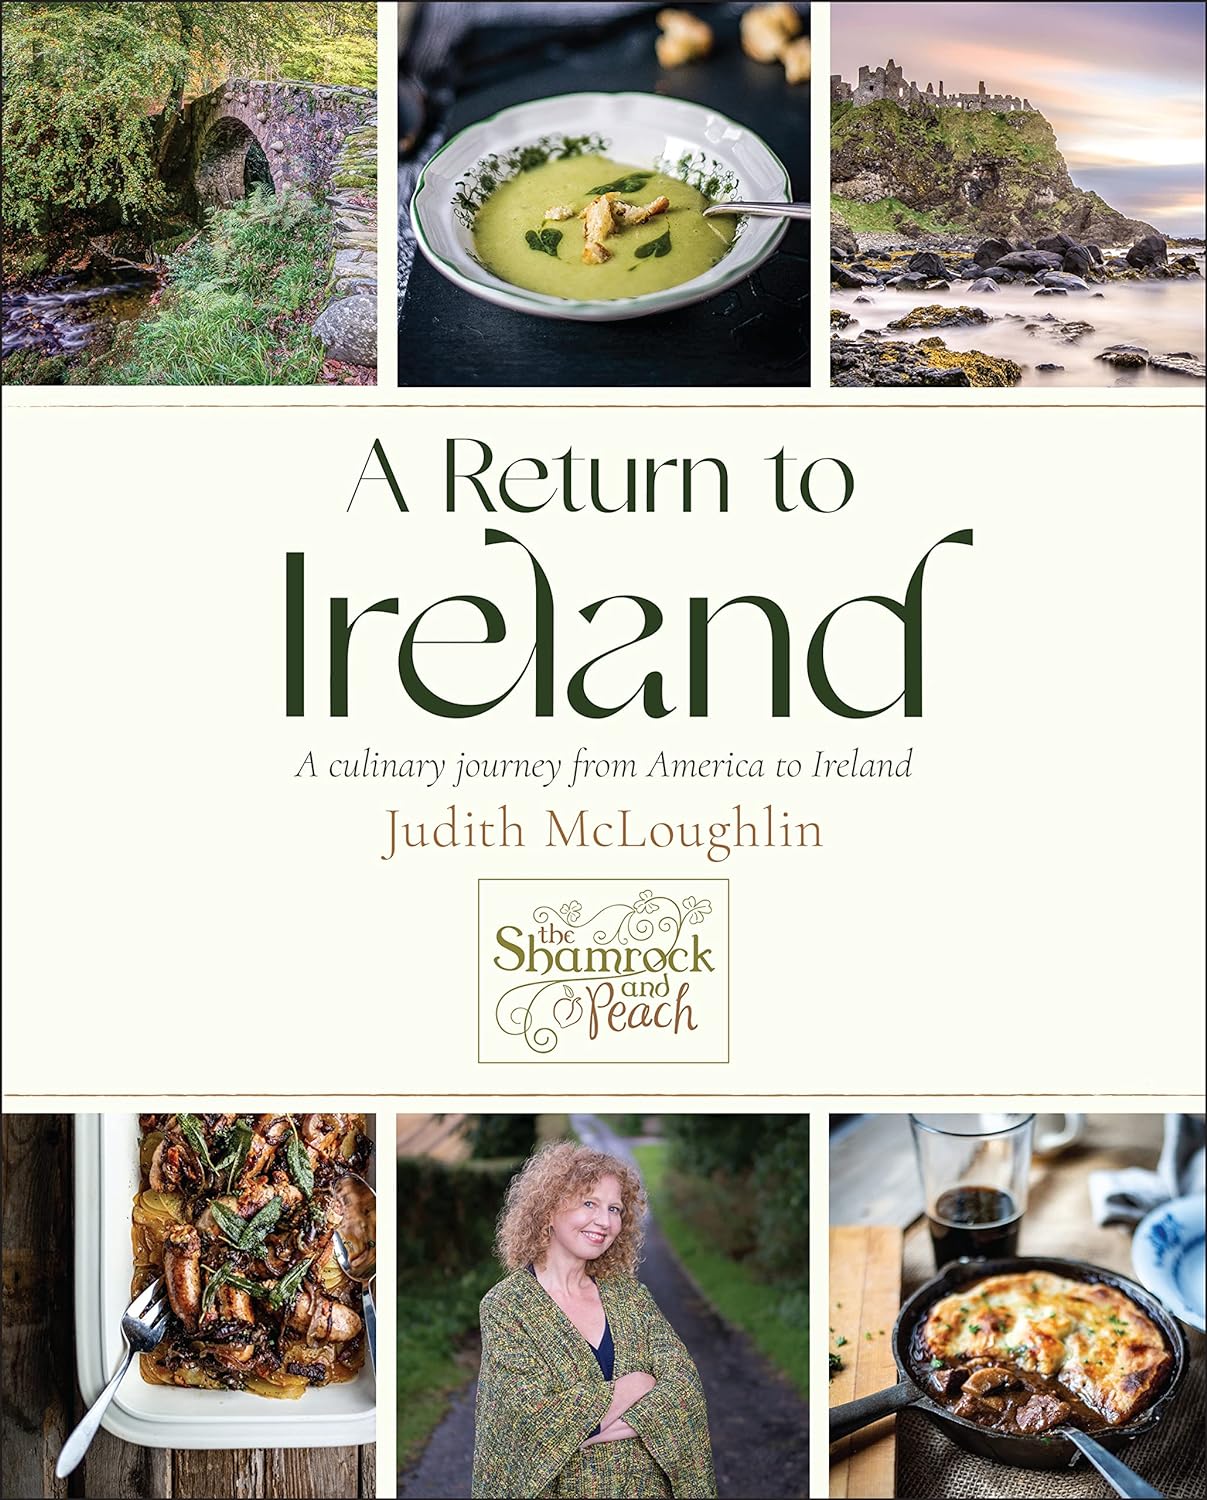 A Return to Ireland: A Culinary Journey from America to Ireland, includes over 100 recipes (Judith McLoughlin)